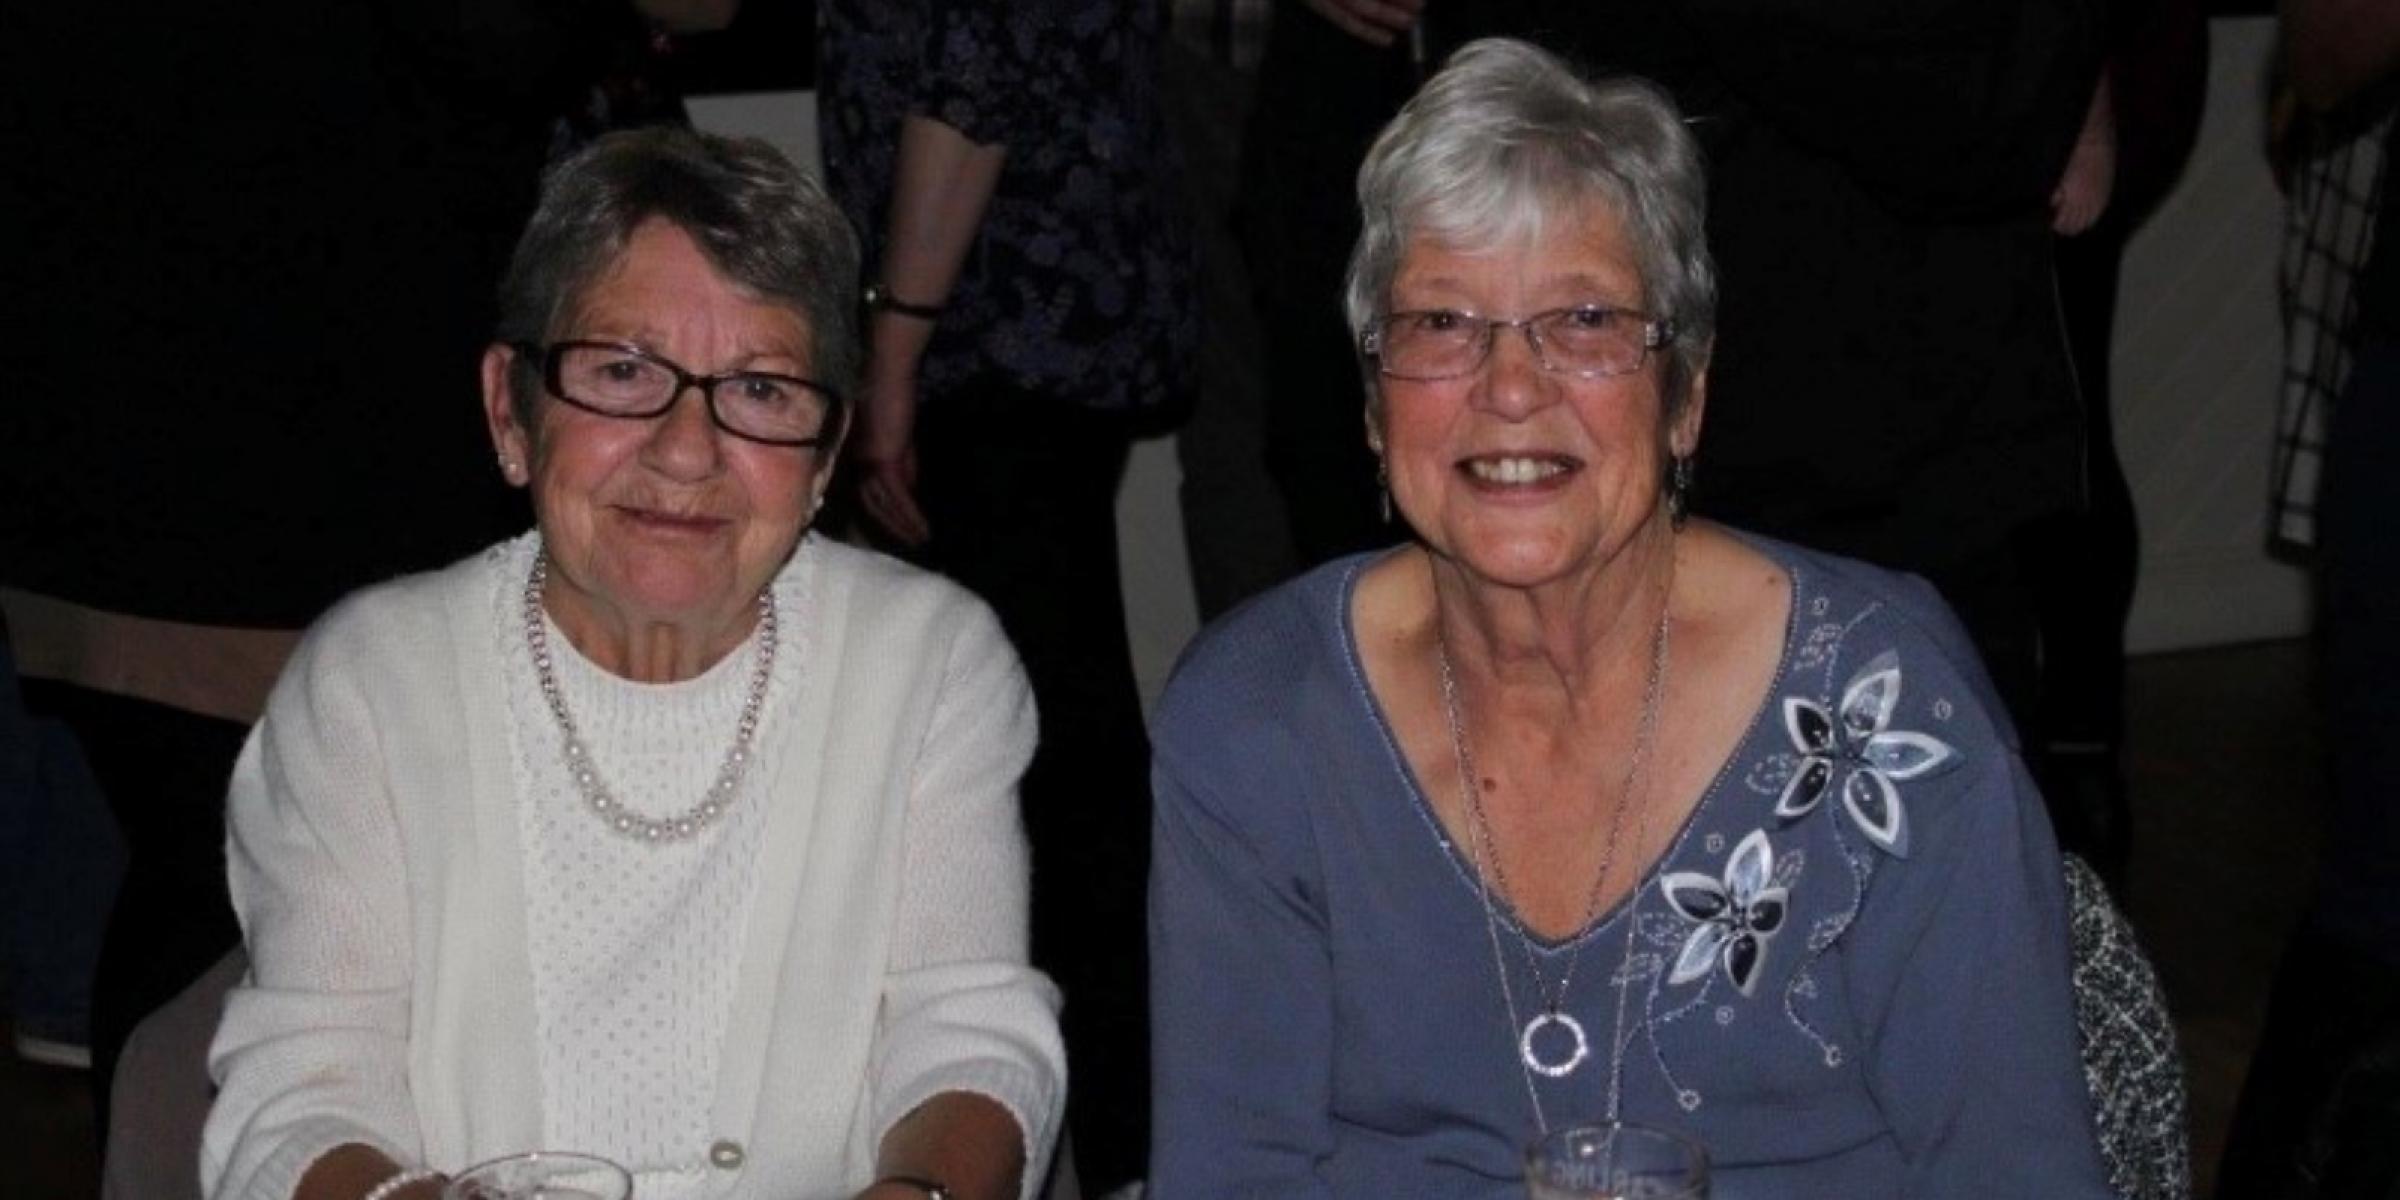 Georgia's two grandmothers, Bet and Janet